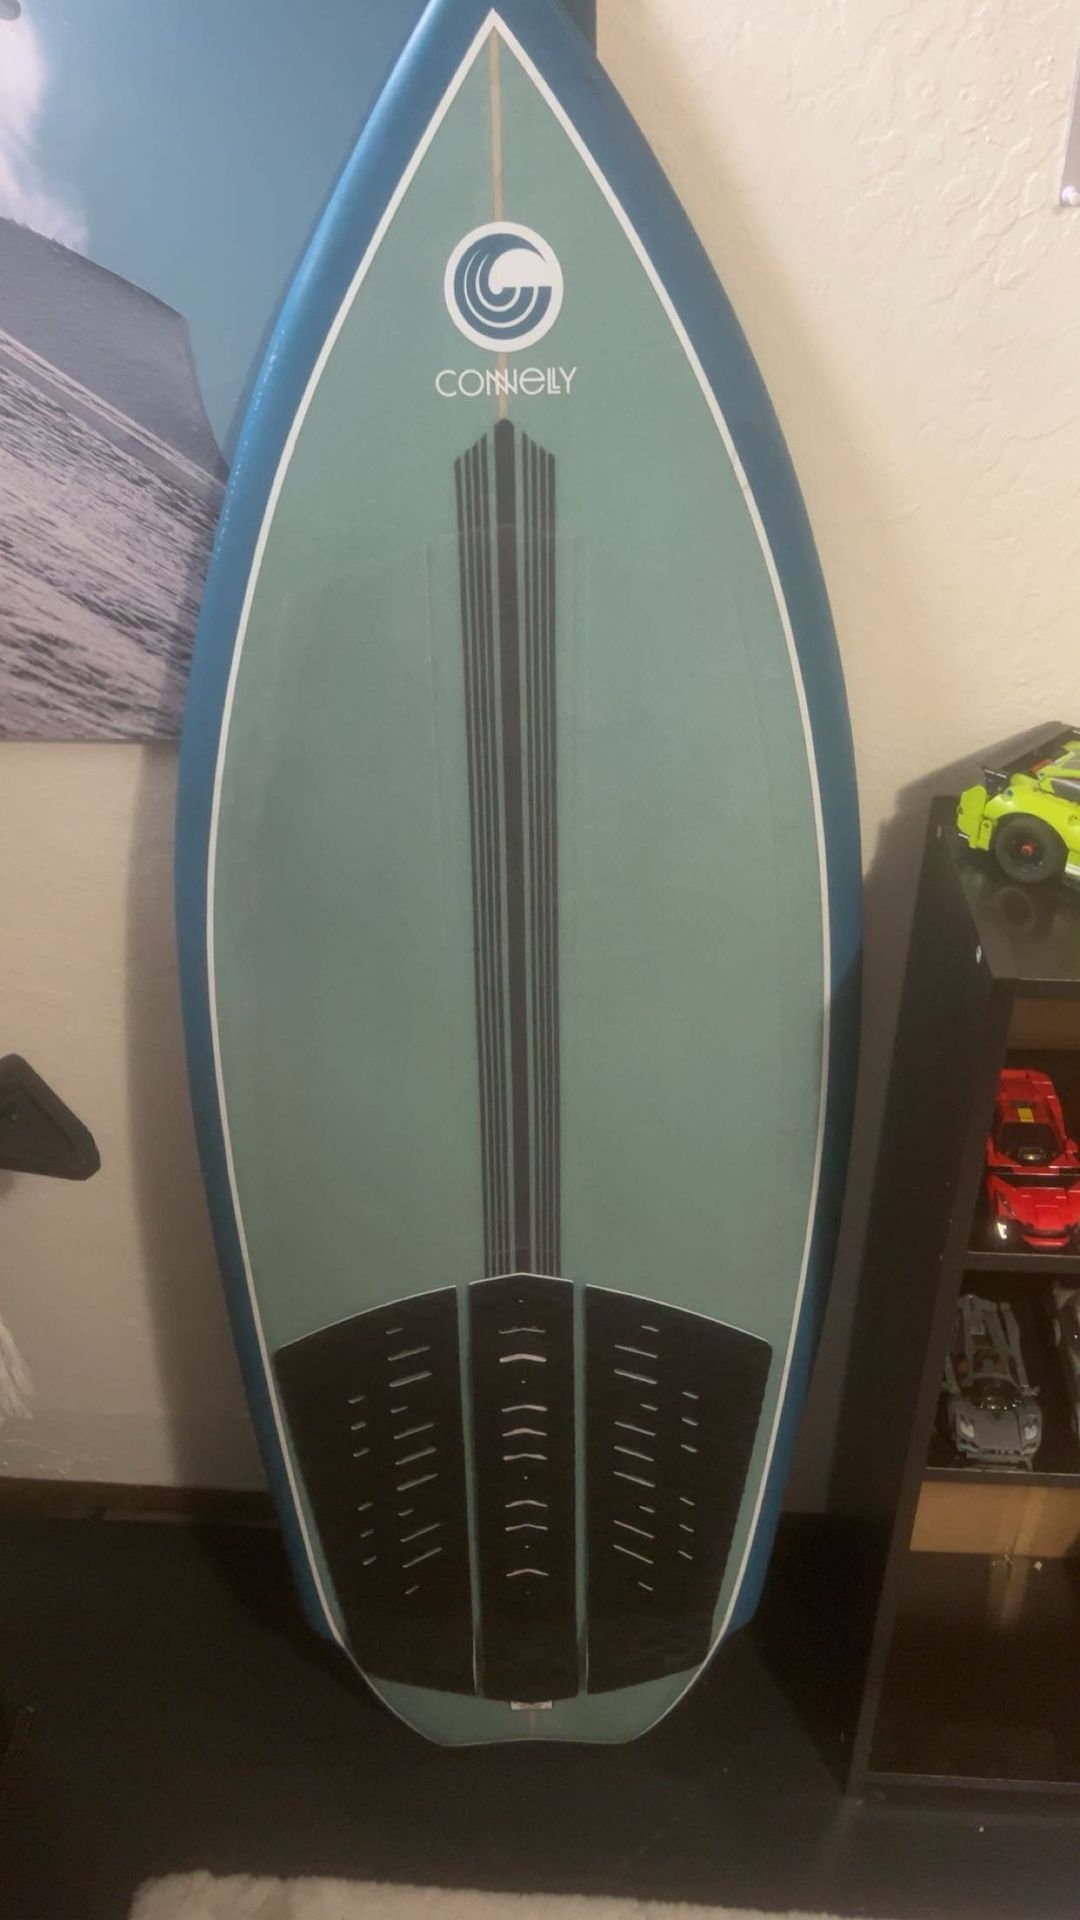 Connelly Jet Wake Surf Board